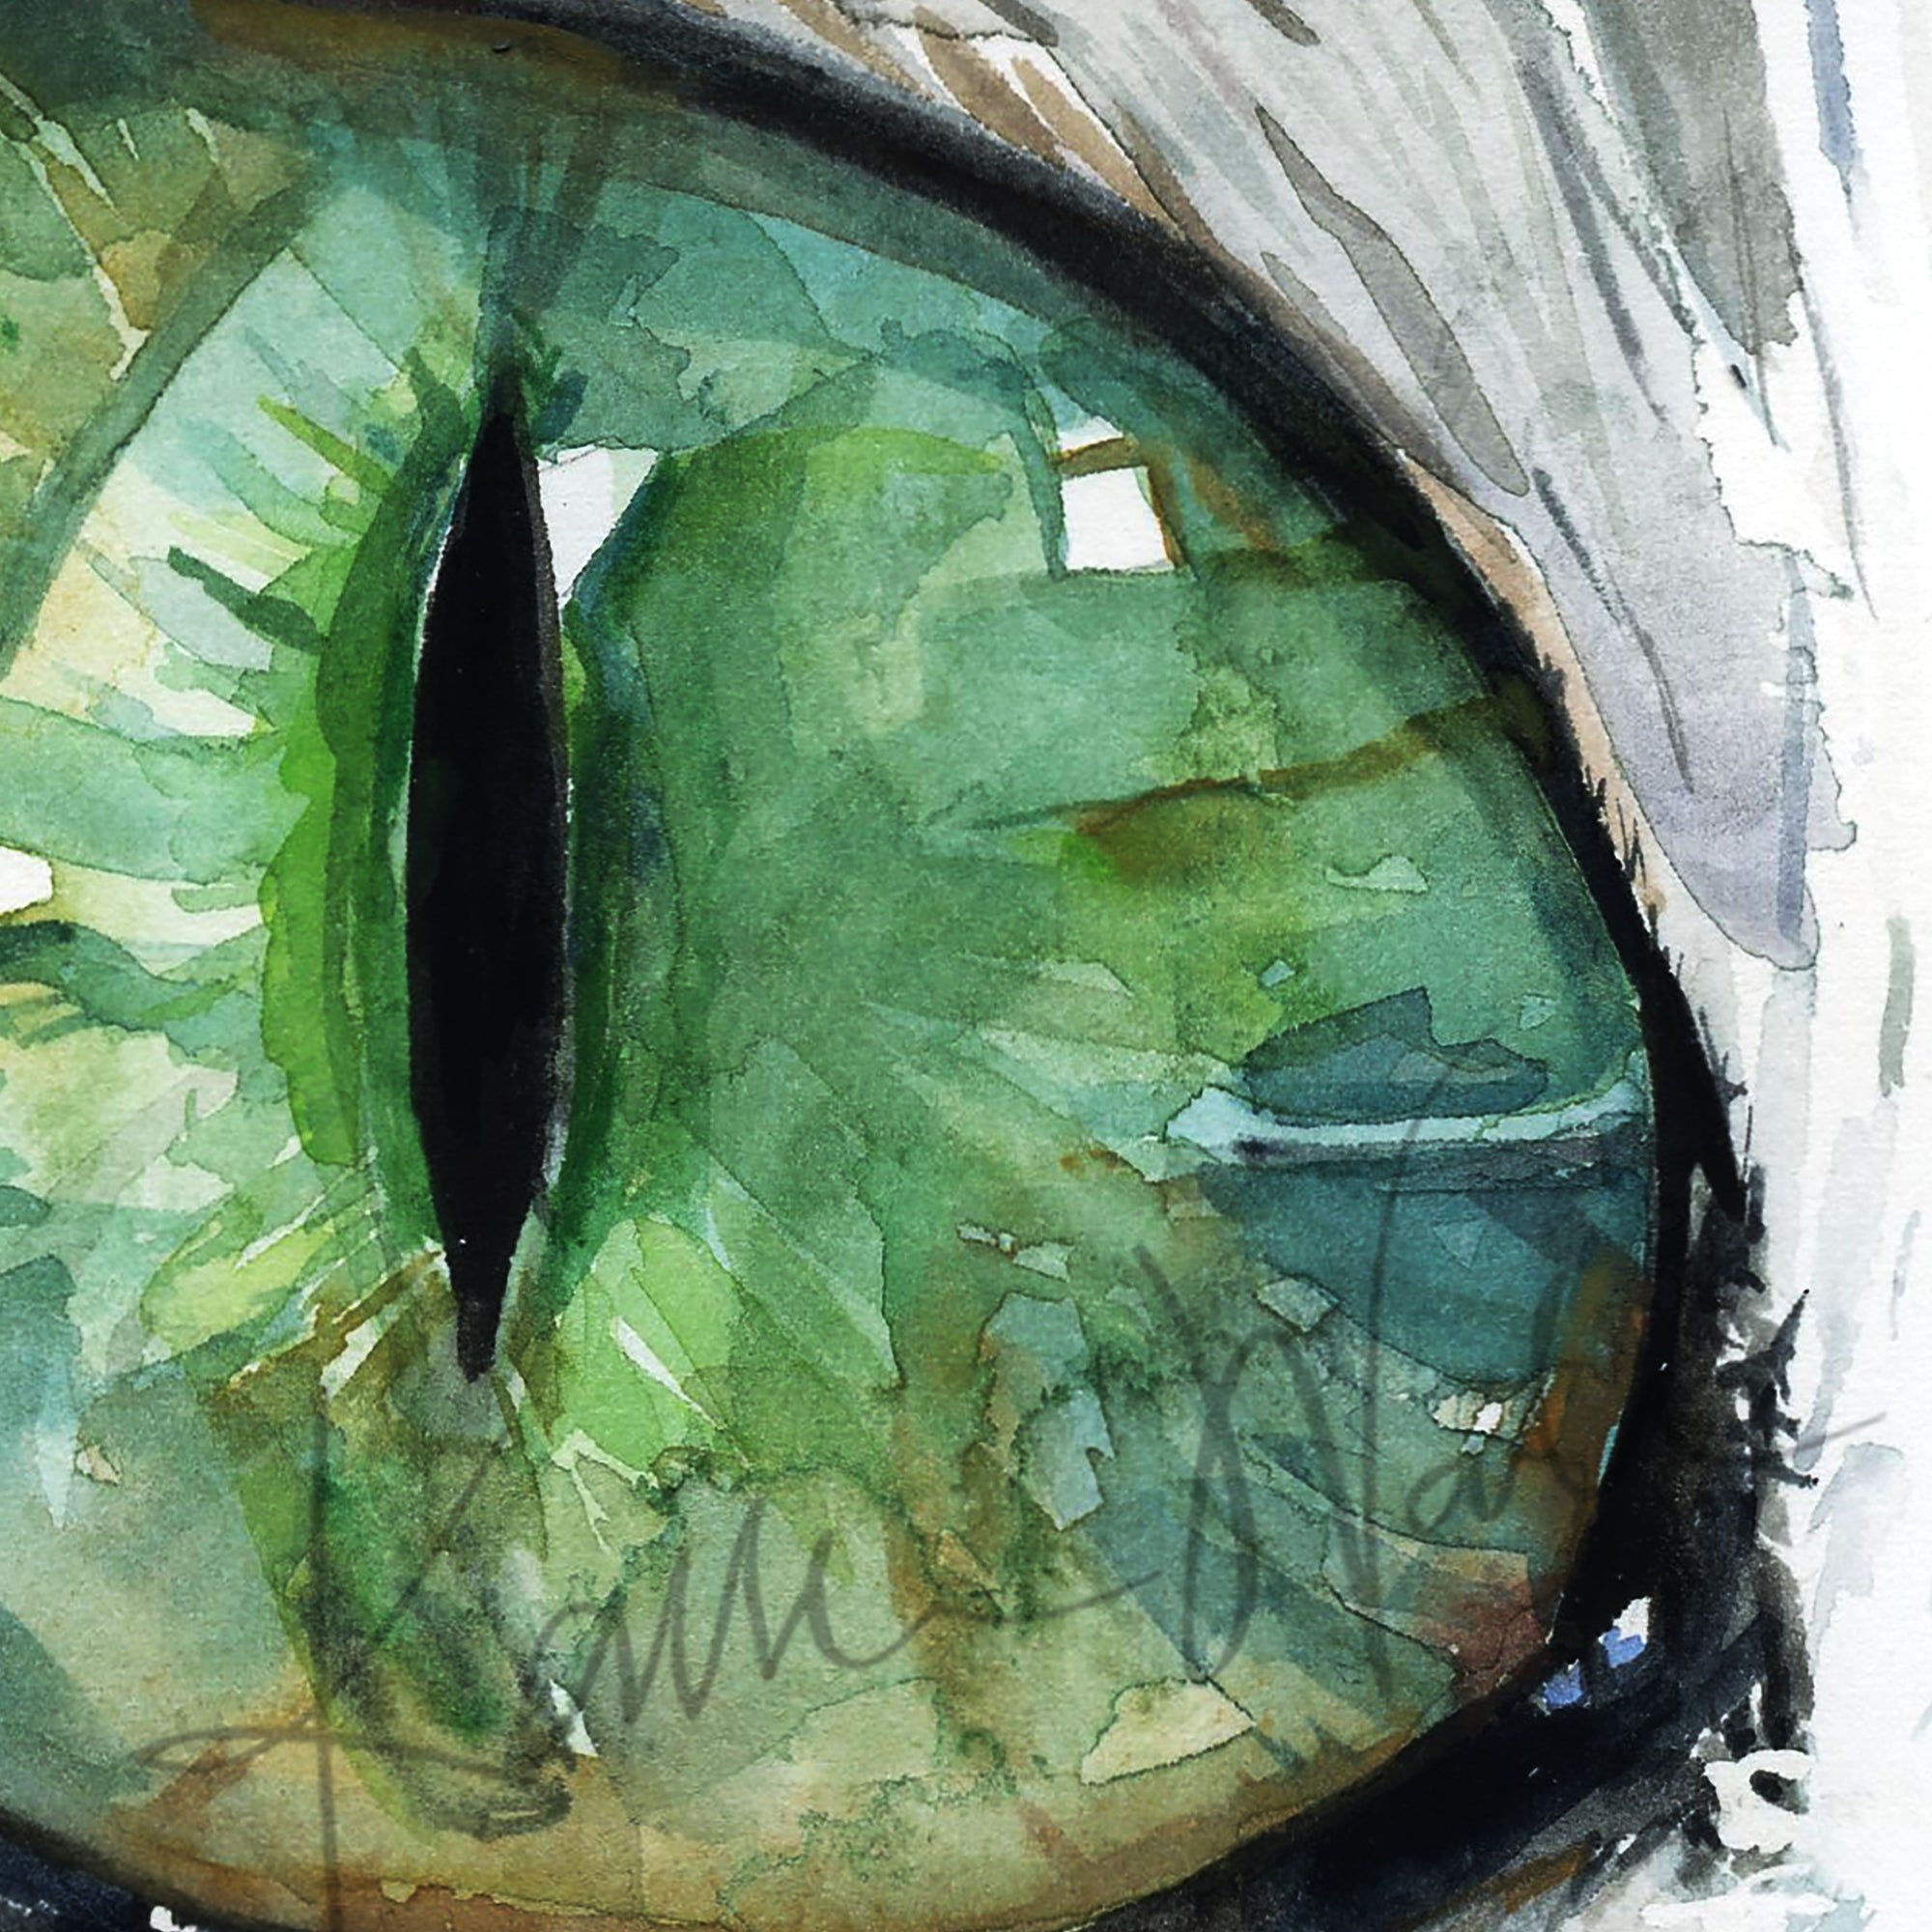 Zoomed in view of a watercolor painting of a zoomed in perspective of a green cat's eye.